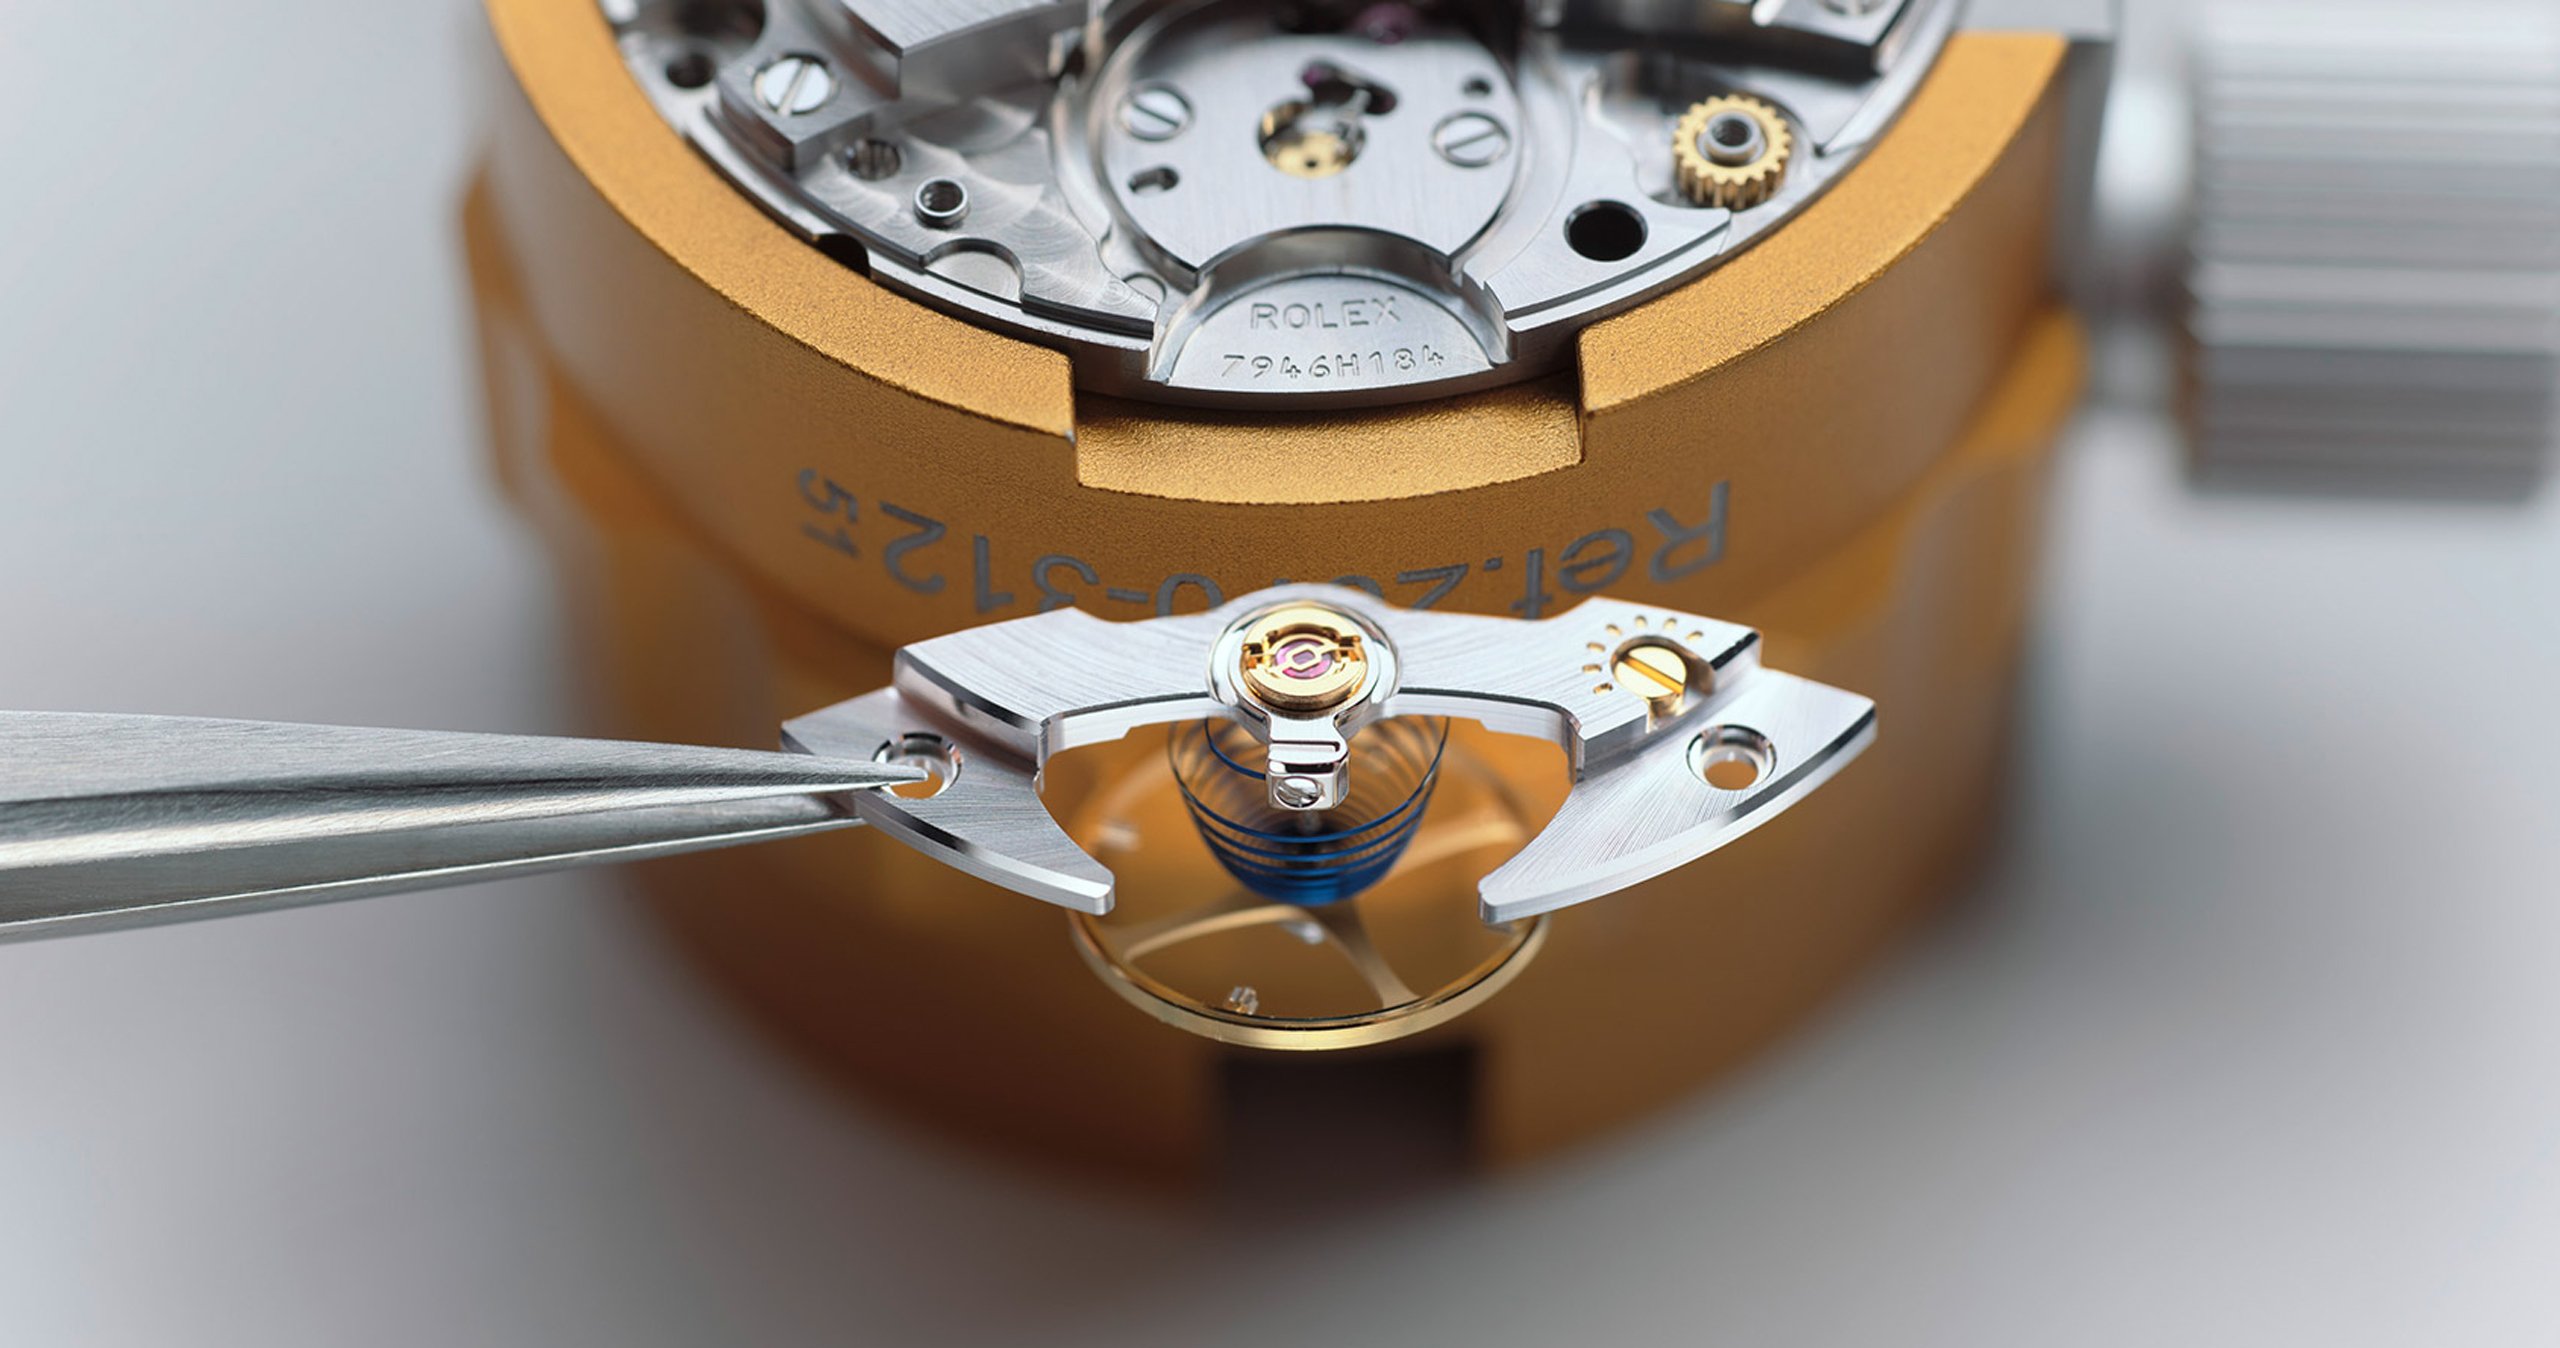 Rolex servicing procedure assembly lubrication of the movement